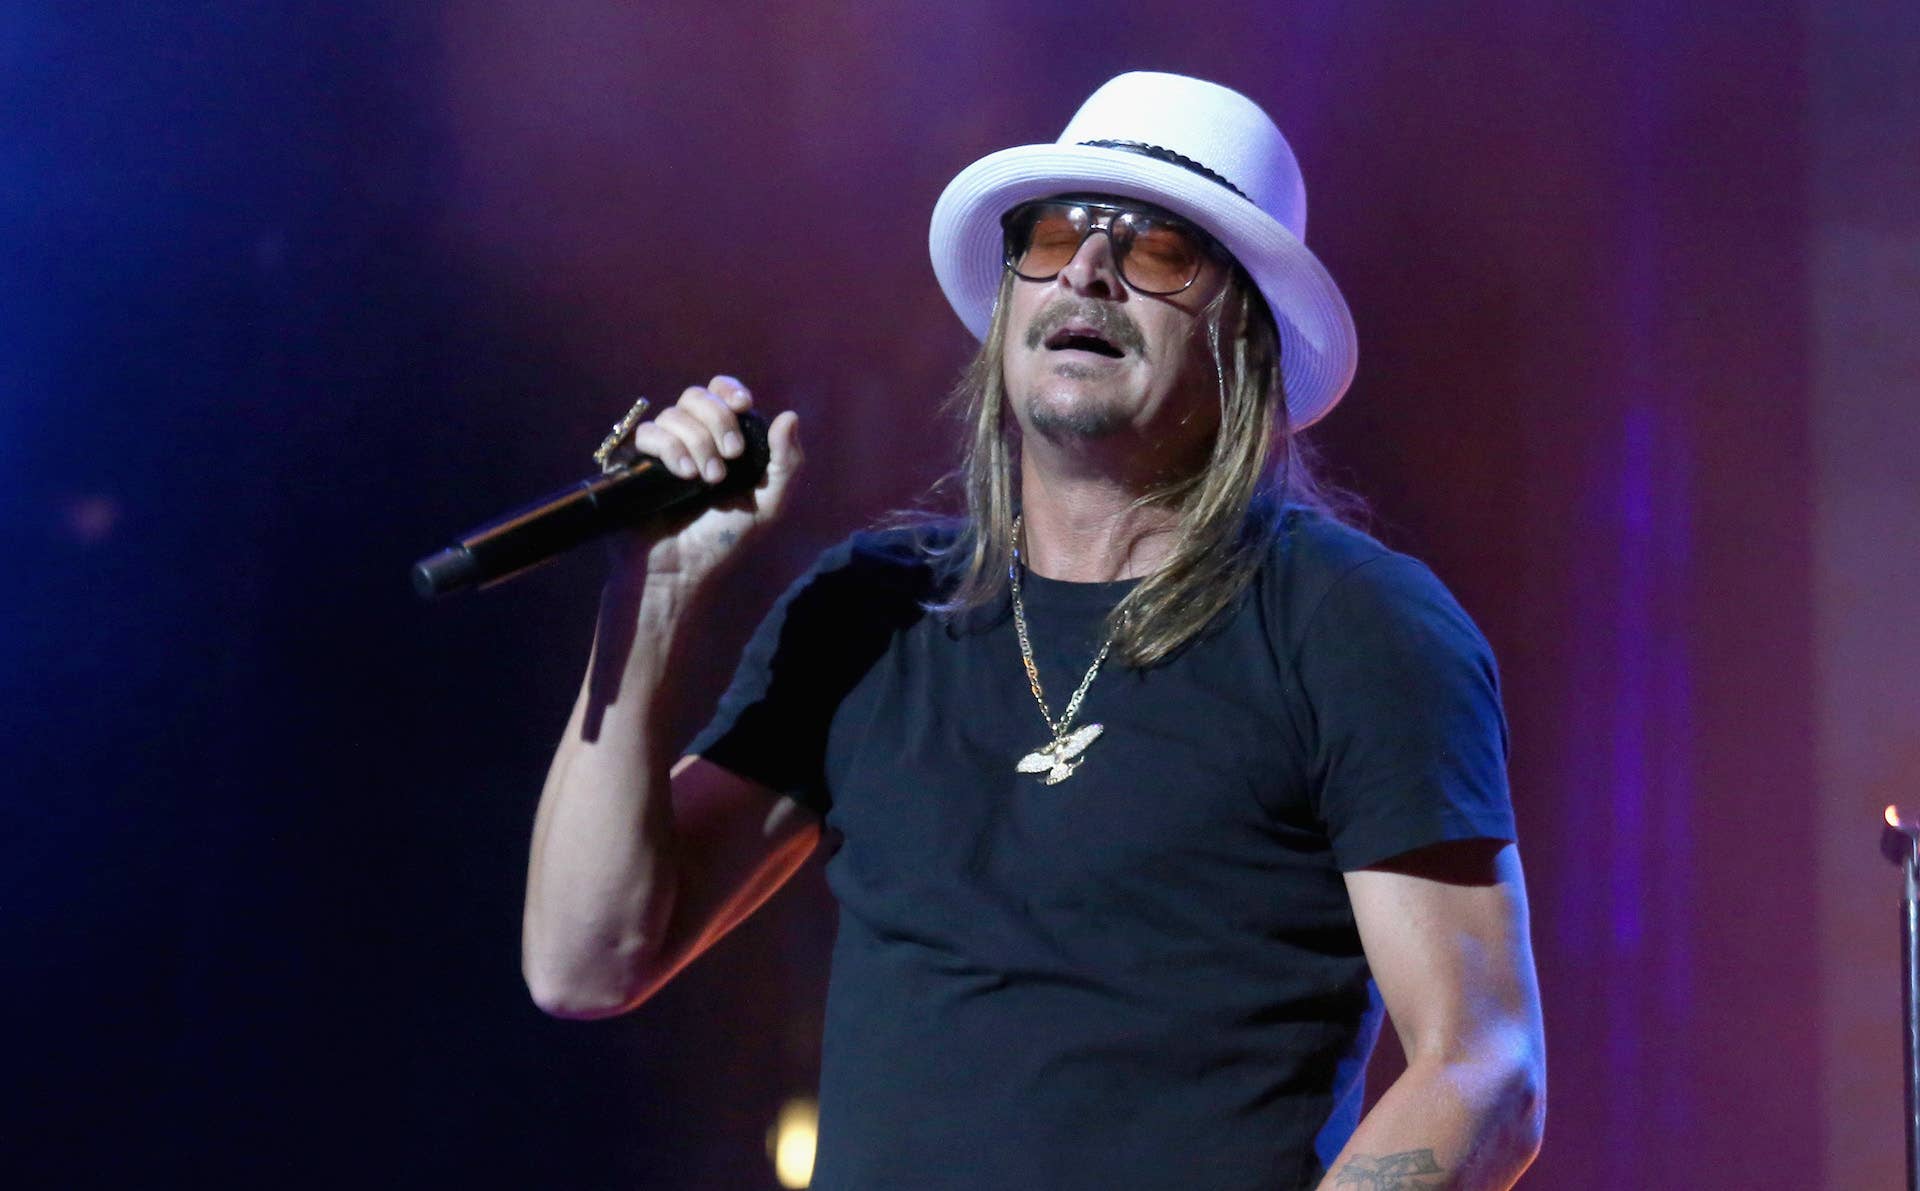 Kid Rock performs in 2019 at Texas AT&T Stadium